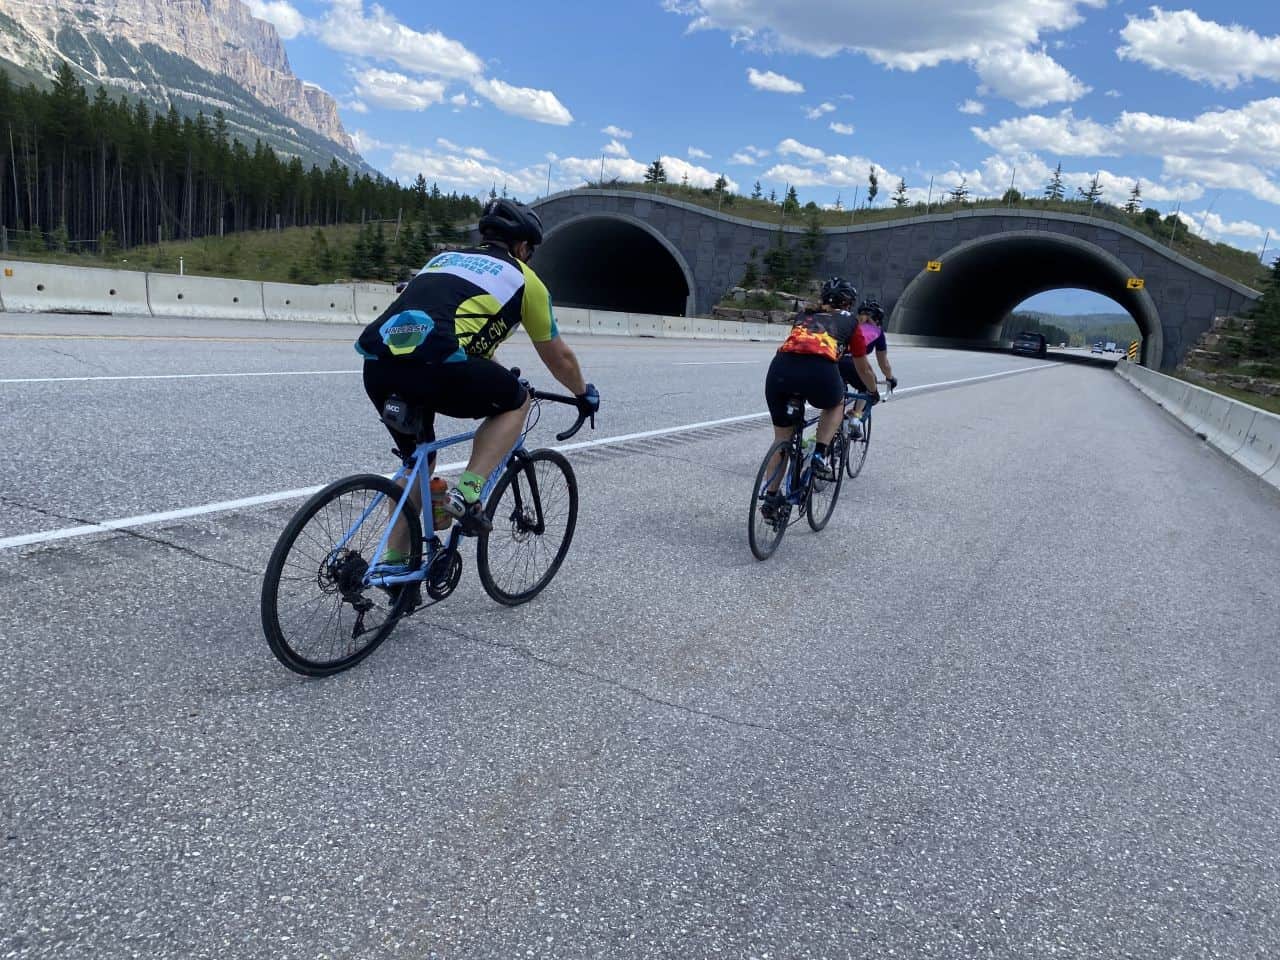 These wildlife overpasses and highway fencing in Banff National Park have reduced animal-vehicle collisions by over 80% and more than 96% for deer and elk. These wildlife overpasses are essential for keeping both people and animals safe in the national park in Canada's Rocky Mountains.